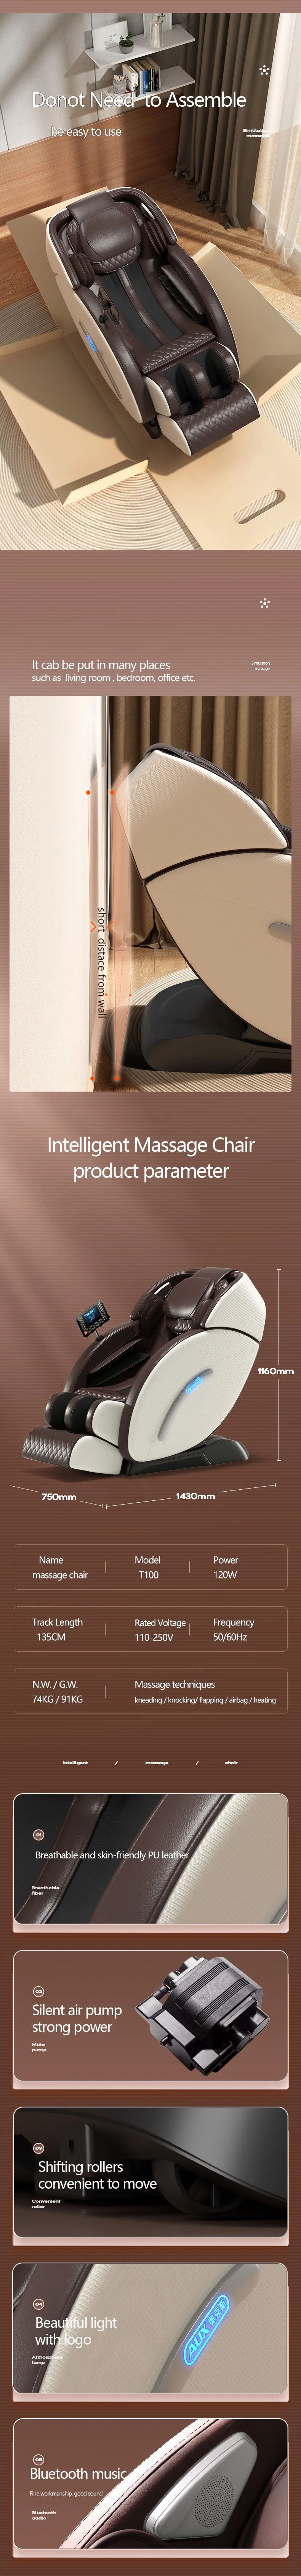 Sauron T100 4D Zero Gravity Heated Home Body Care Massager Chairs Recliner